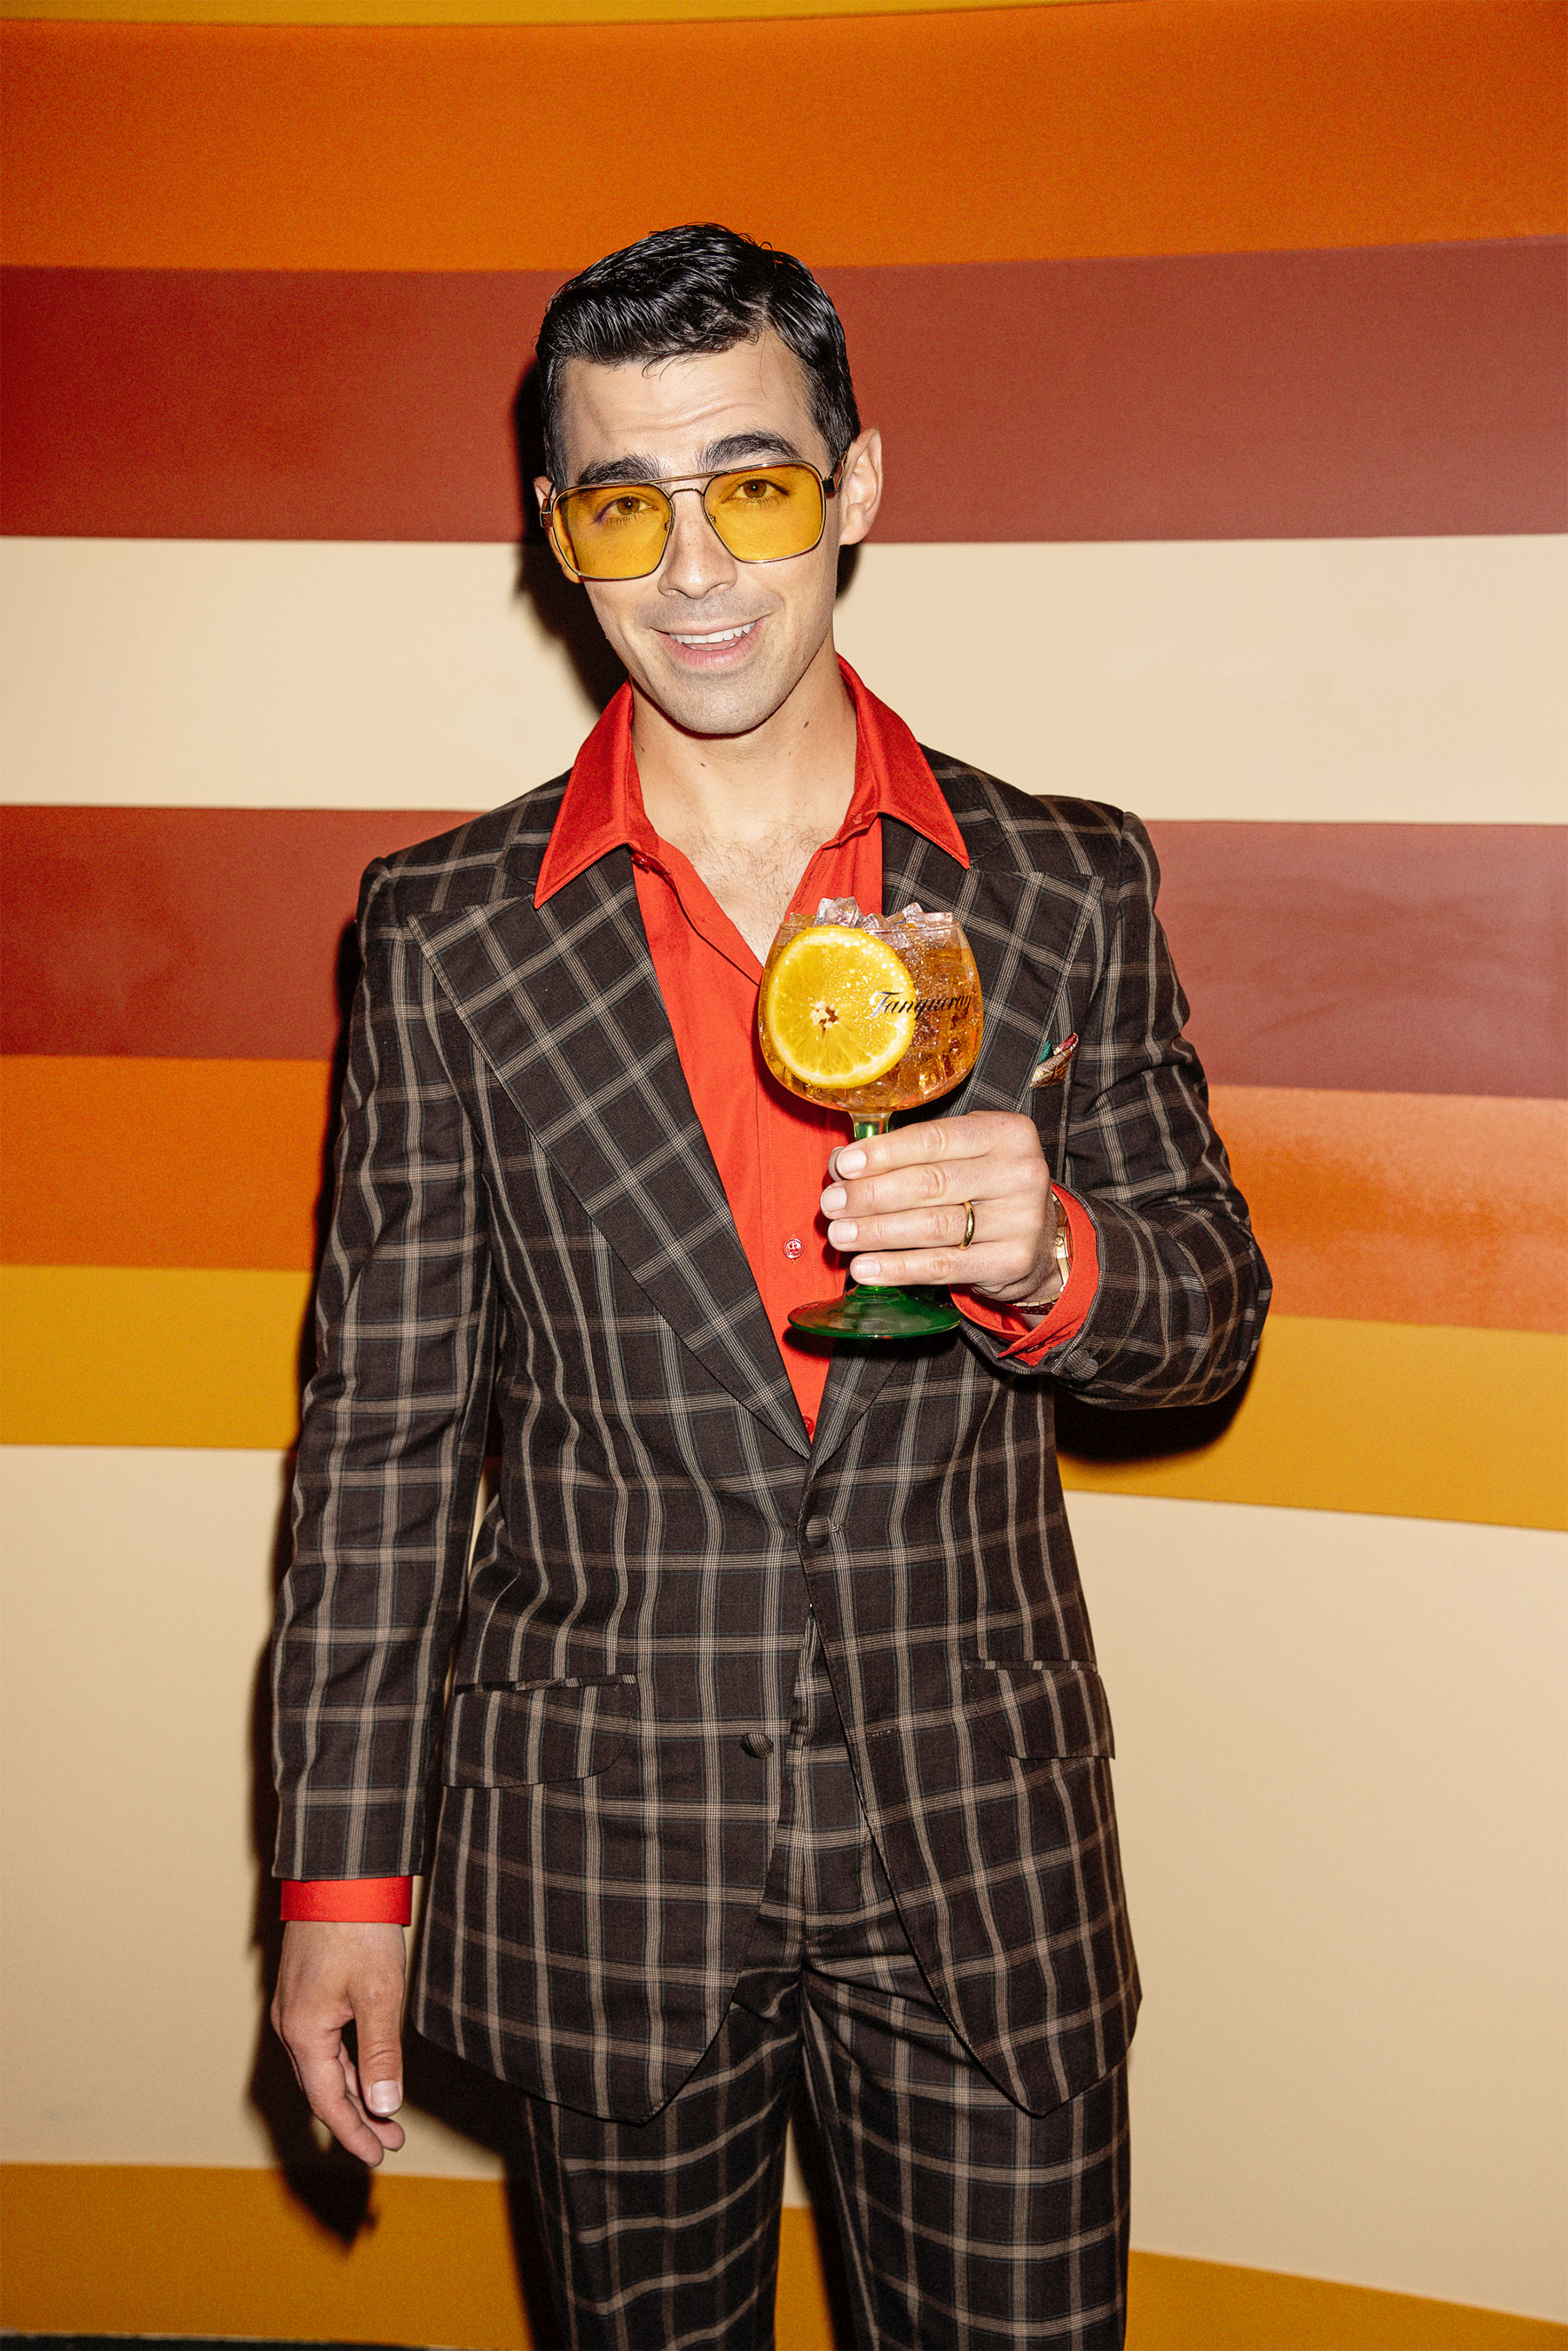 Tanqueray teamed up with Joe Jonas to launch ‘Today’s Forecast: Sunshine in a Glass,’ a new content series introducing Tanqueray Sevilla Orange nationally. / Photo Credit: Atiba Jefferson